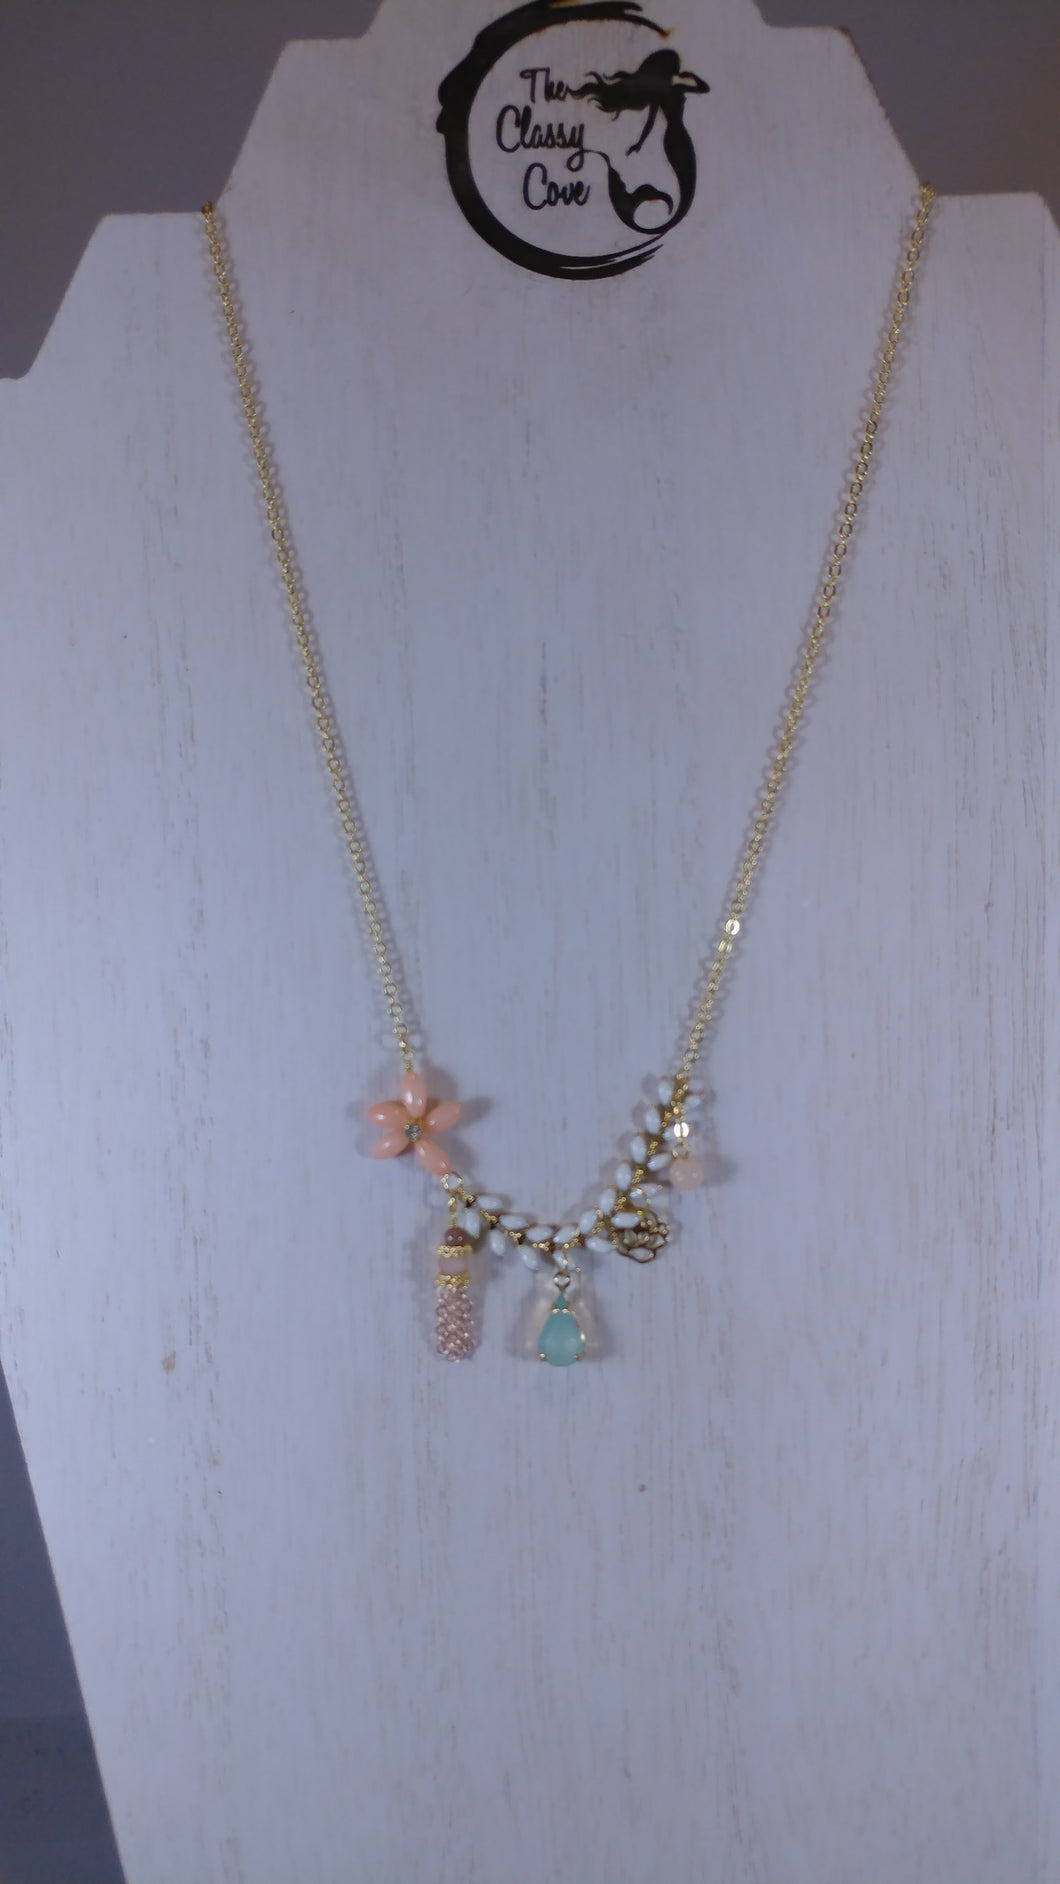 Delicate Beauty Necklace in Peach